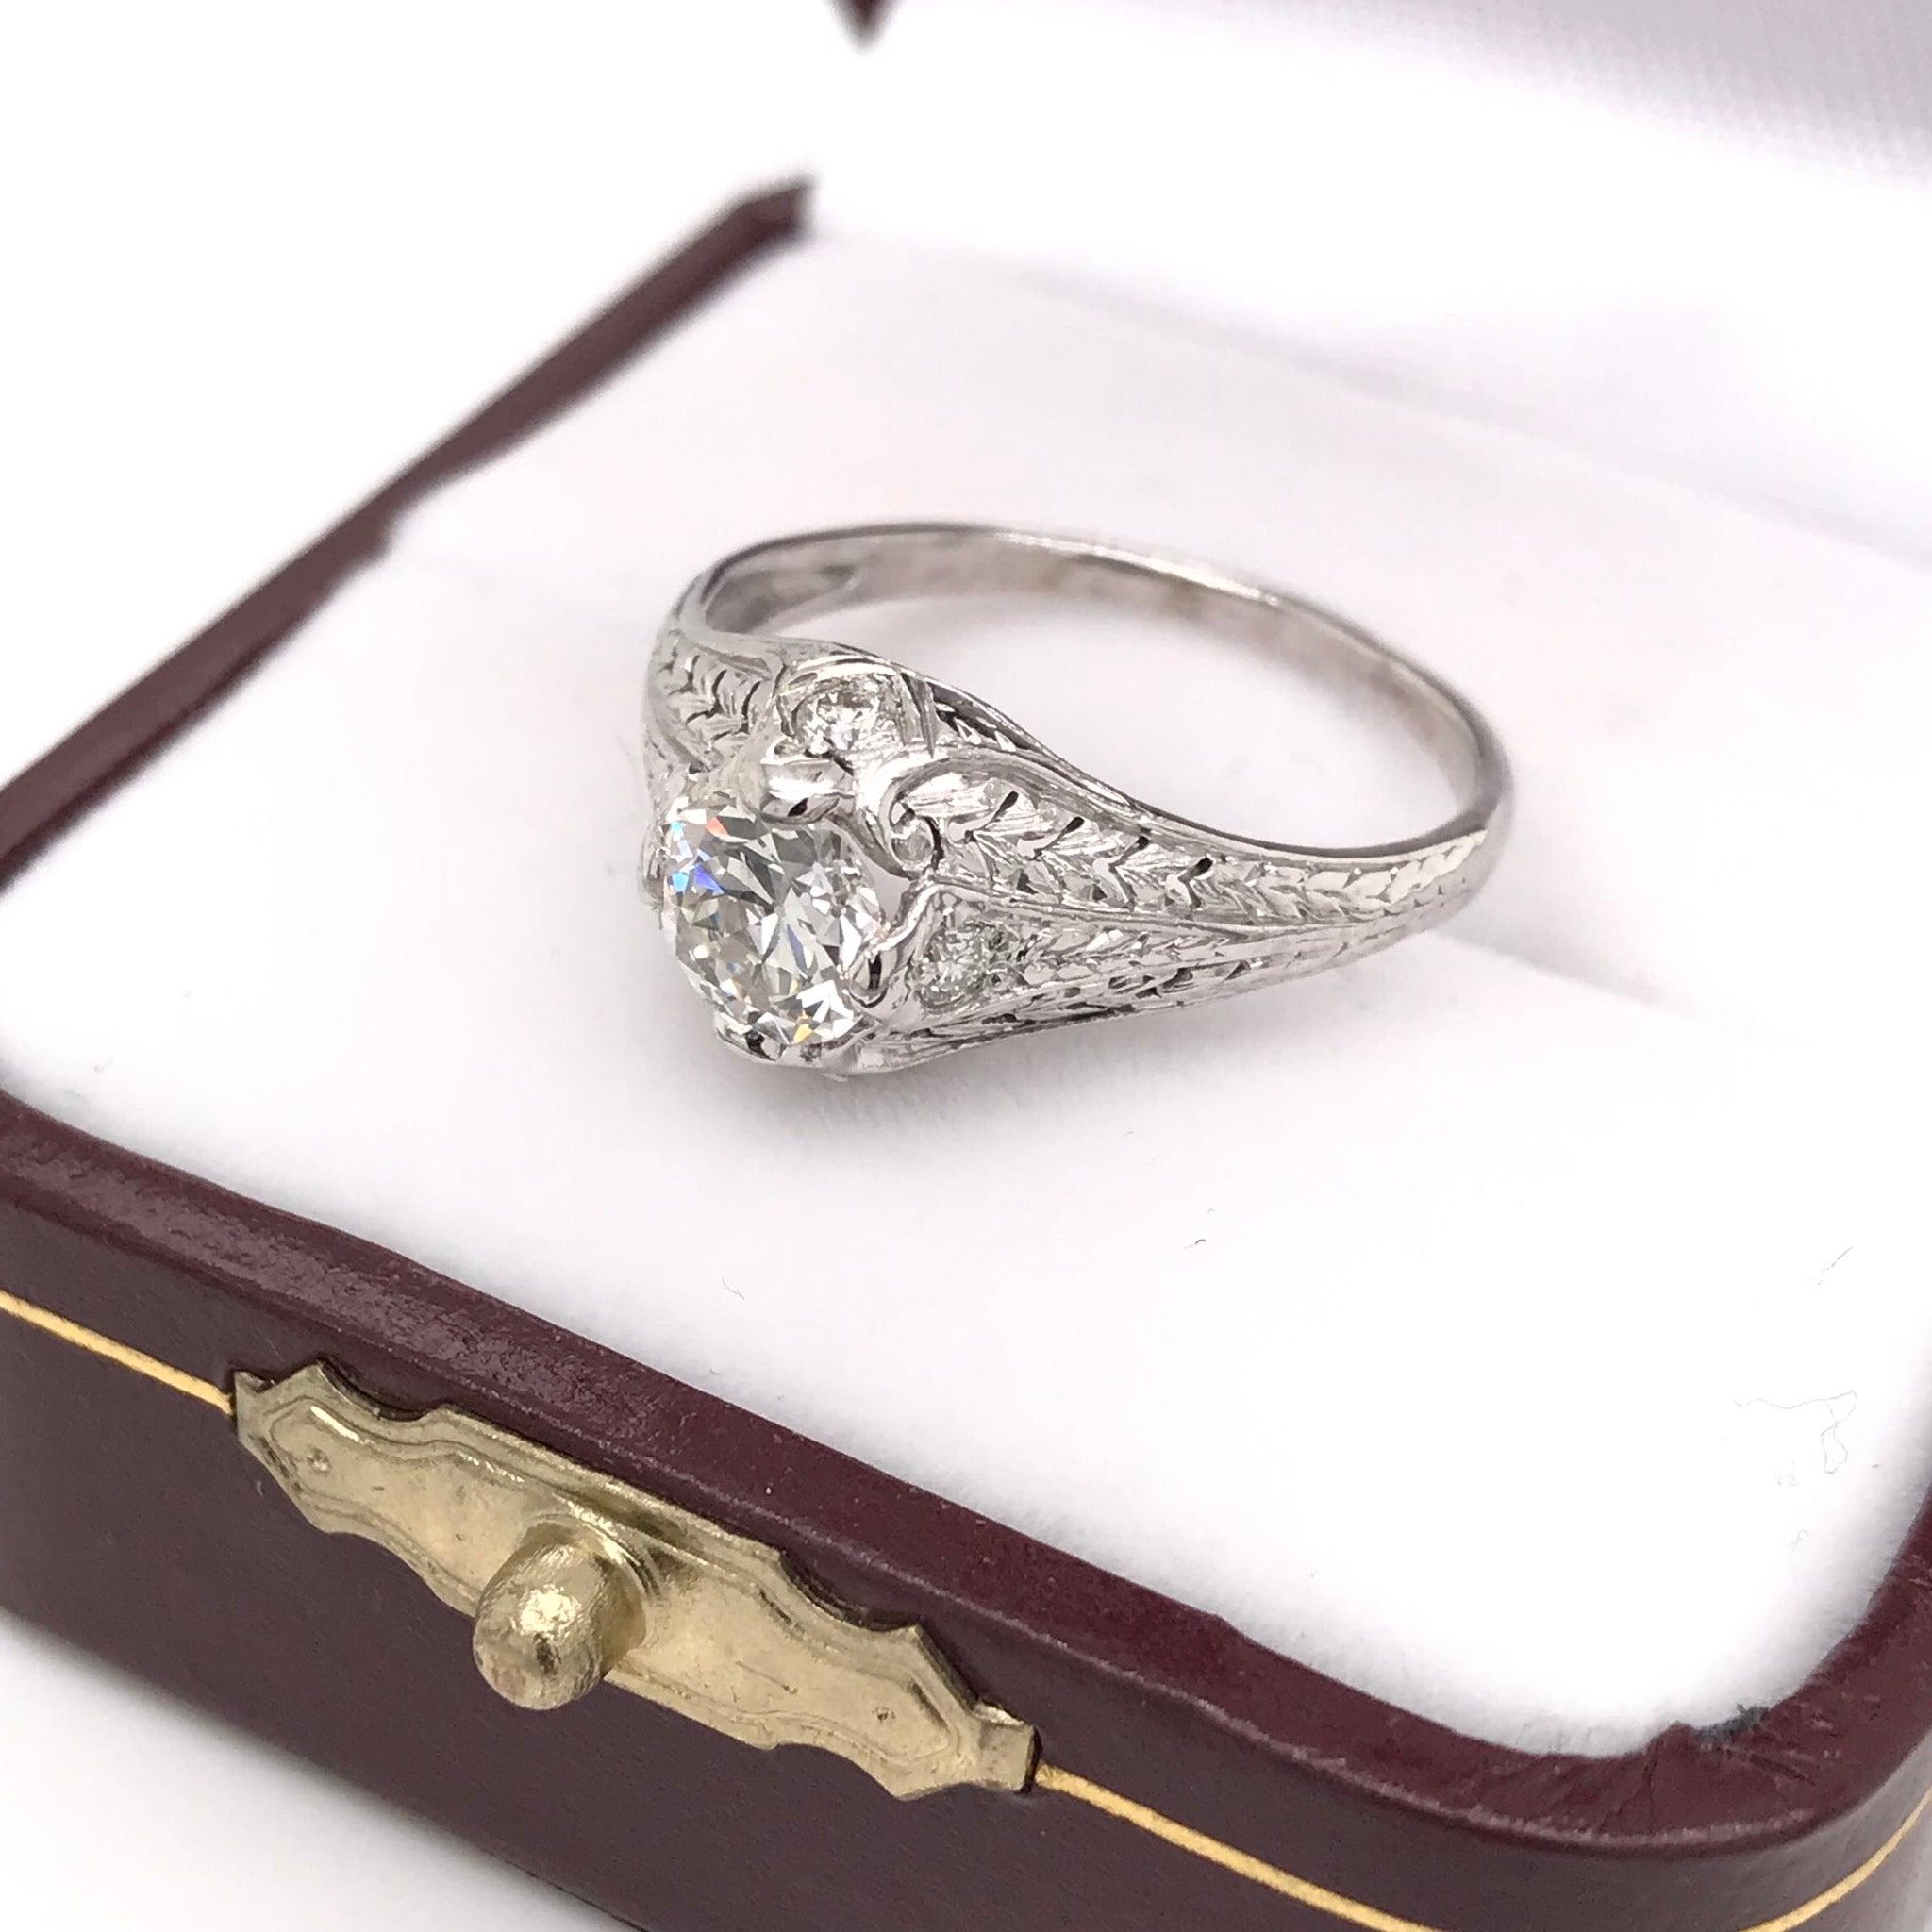 Edwardian 0.71 Carat Diamond and Platinum Solitaire Ring For Sale 3